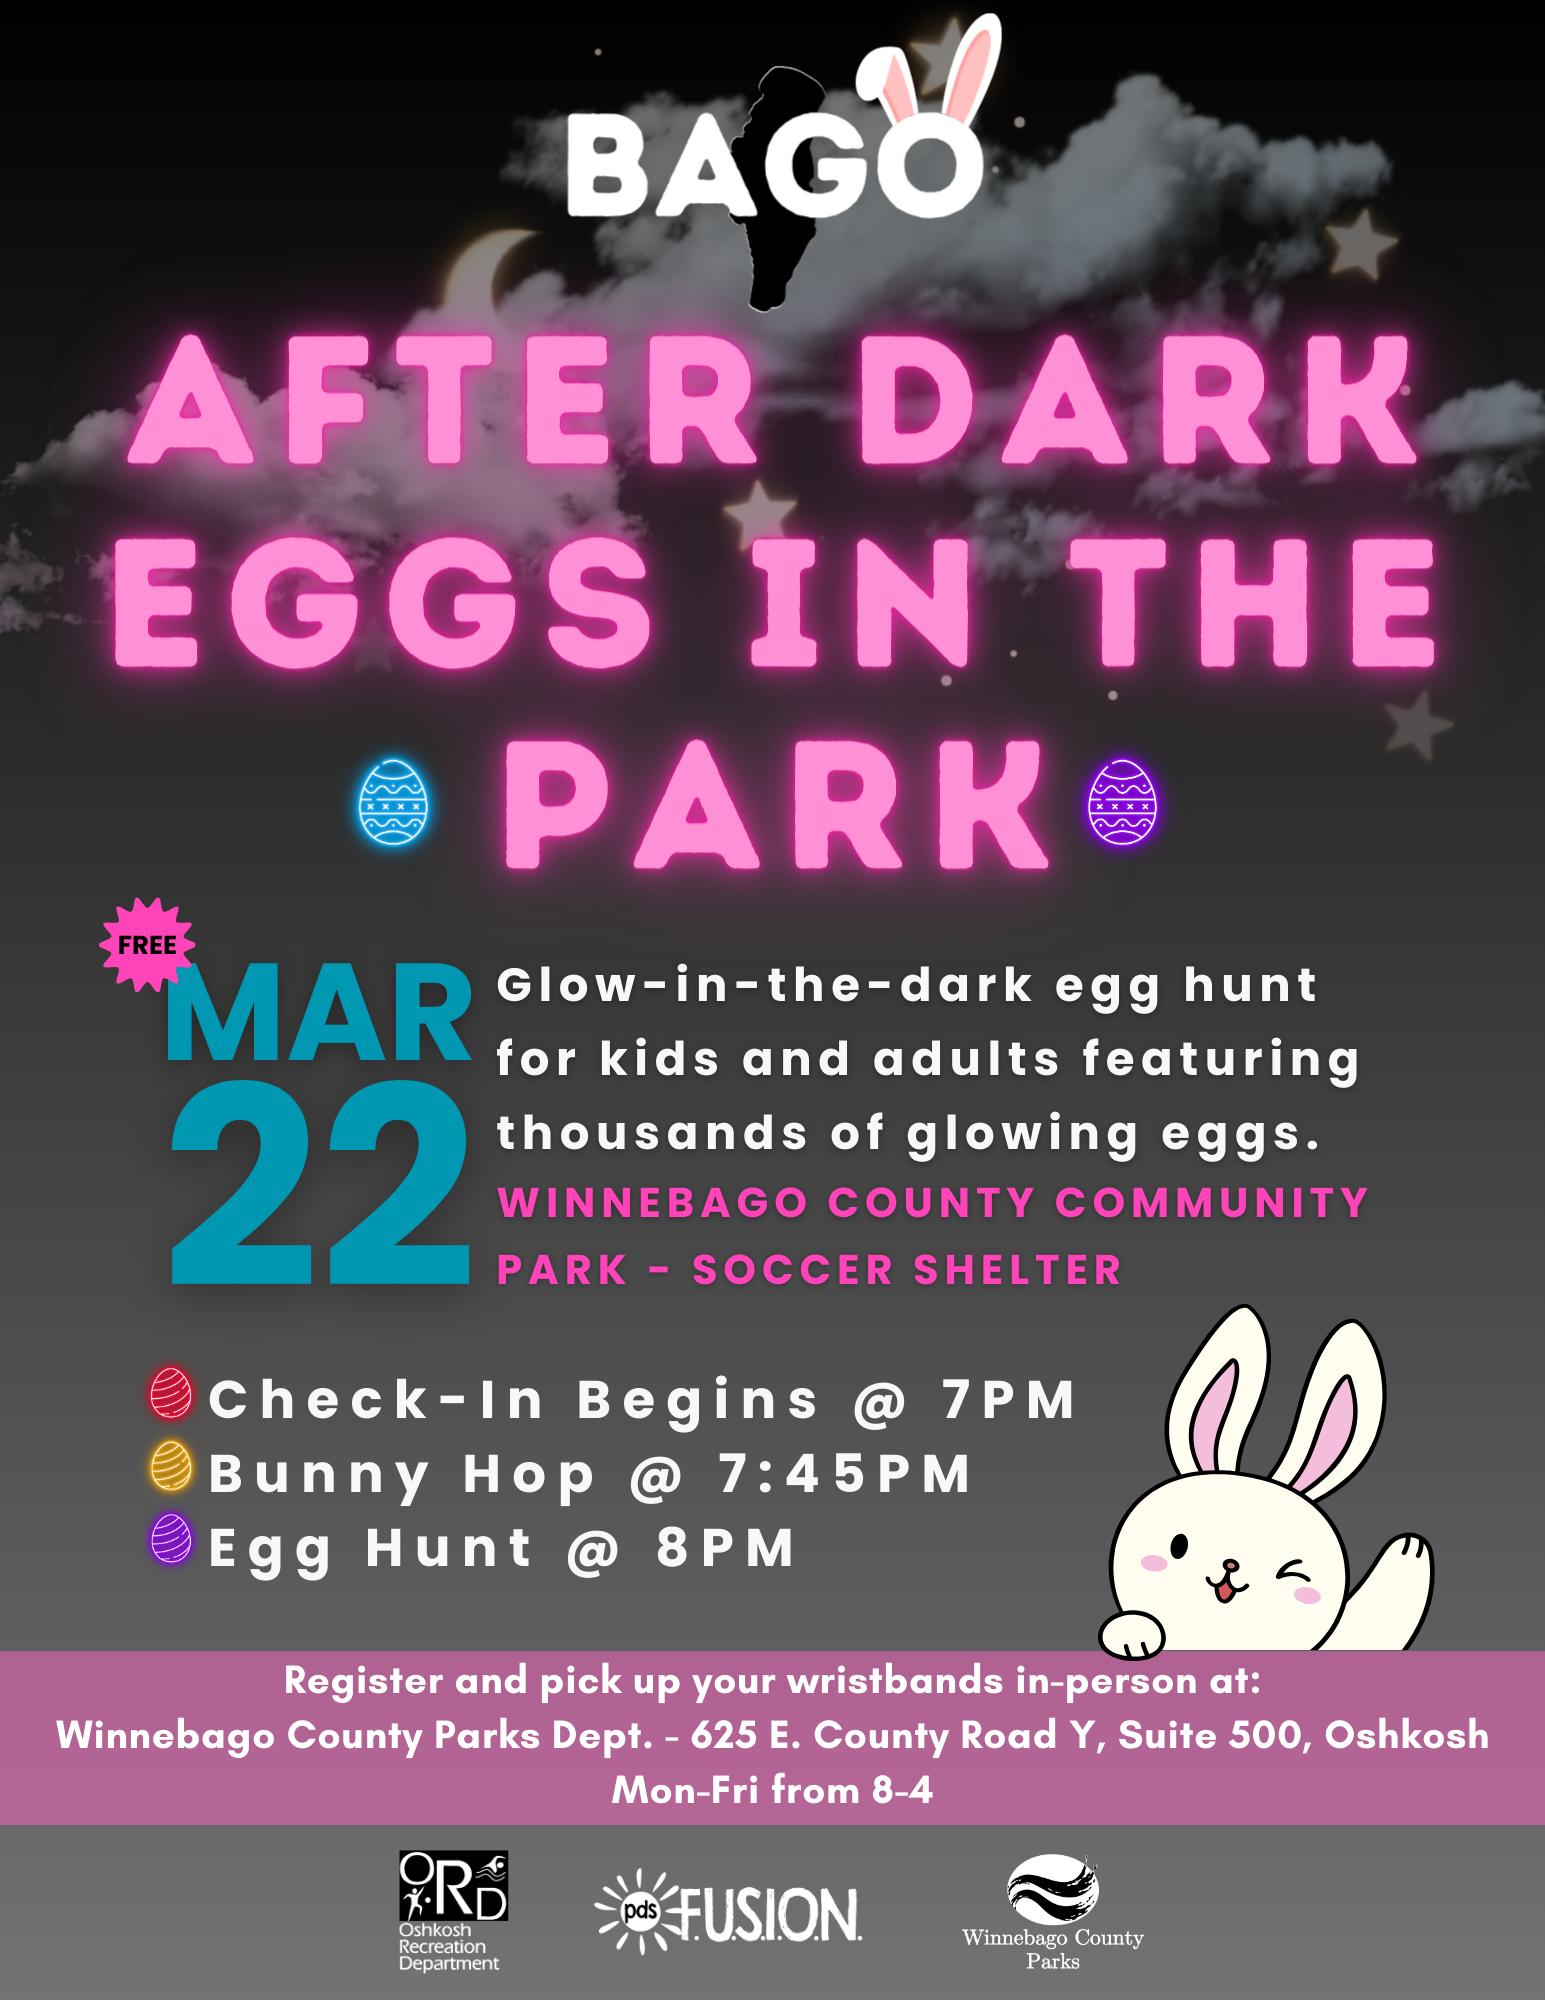 After Dark Eggs in the Park